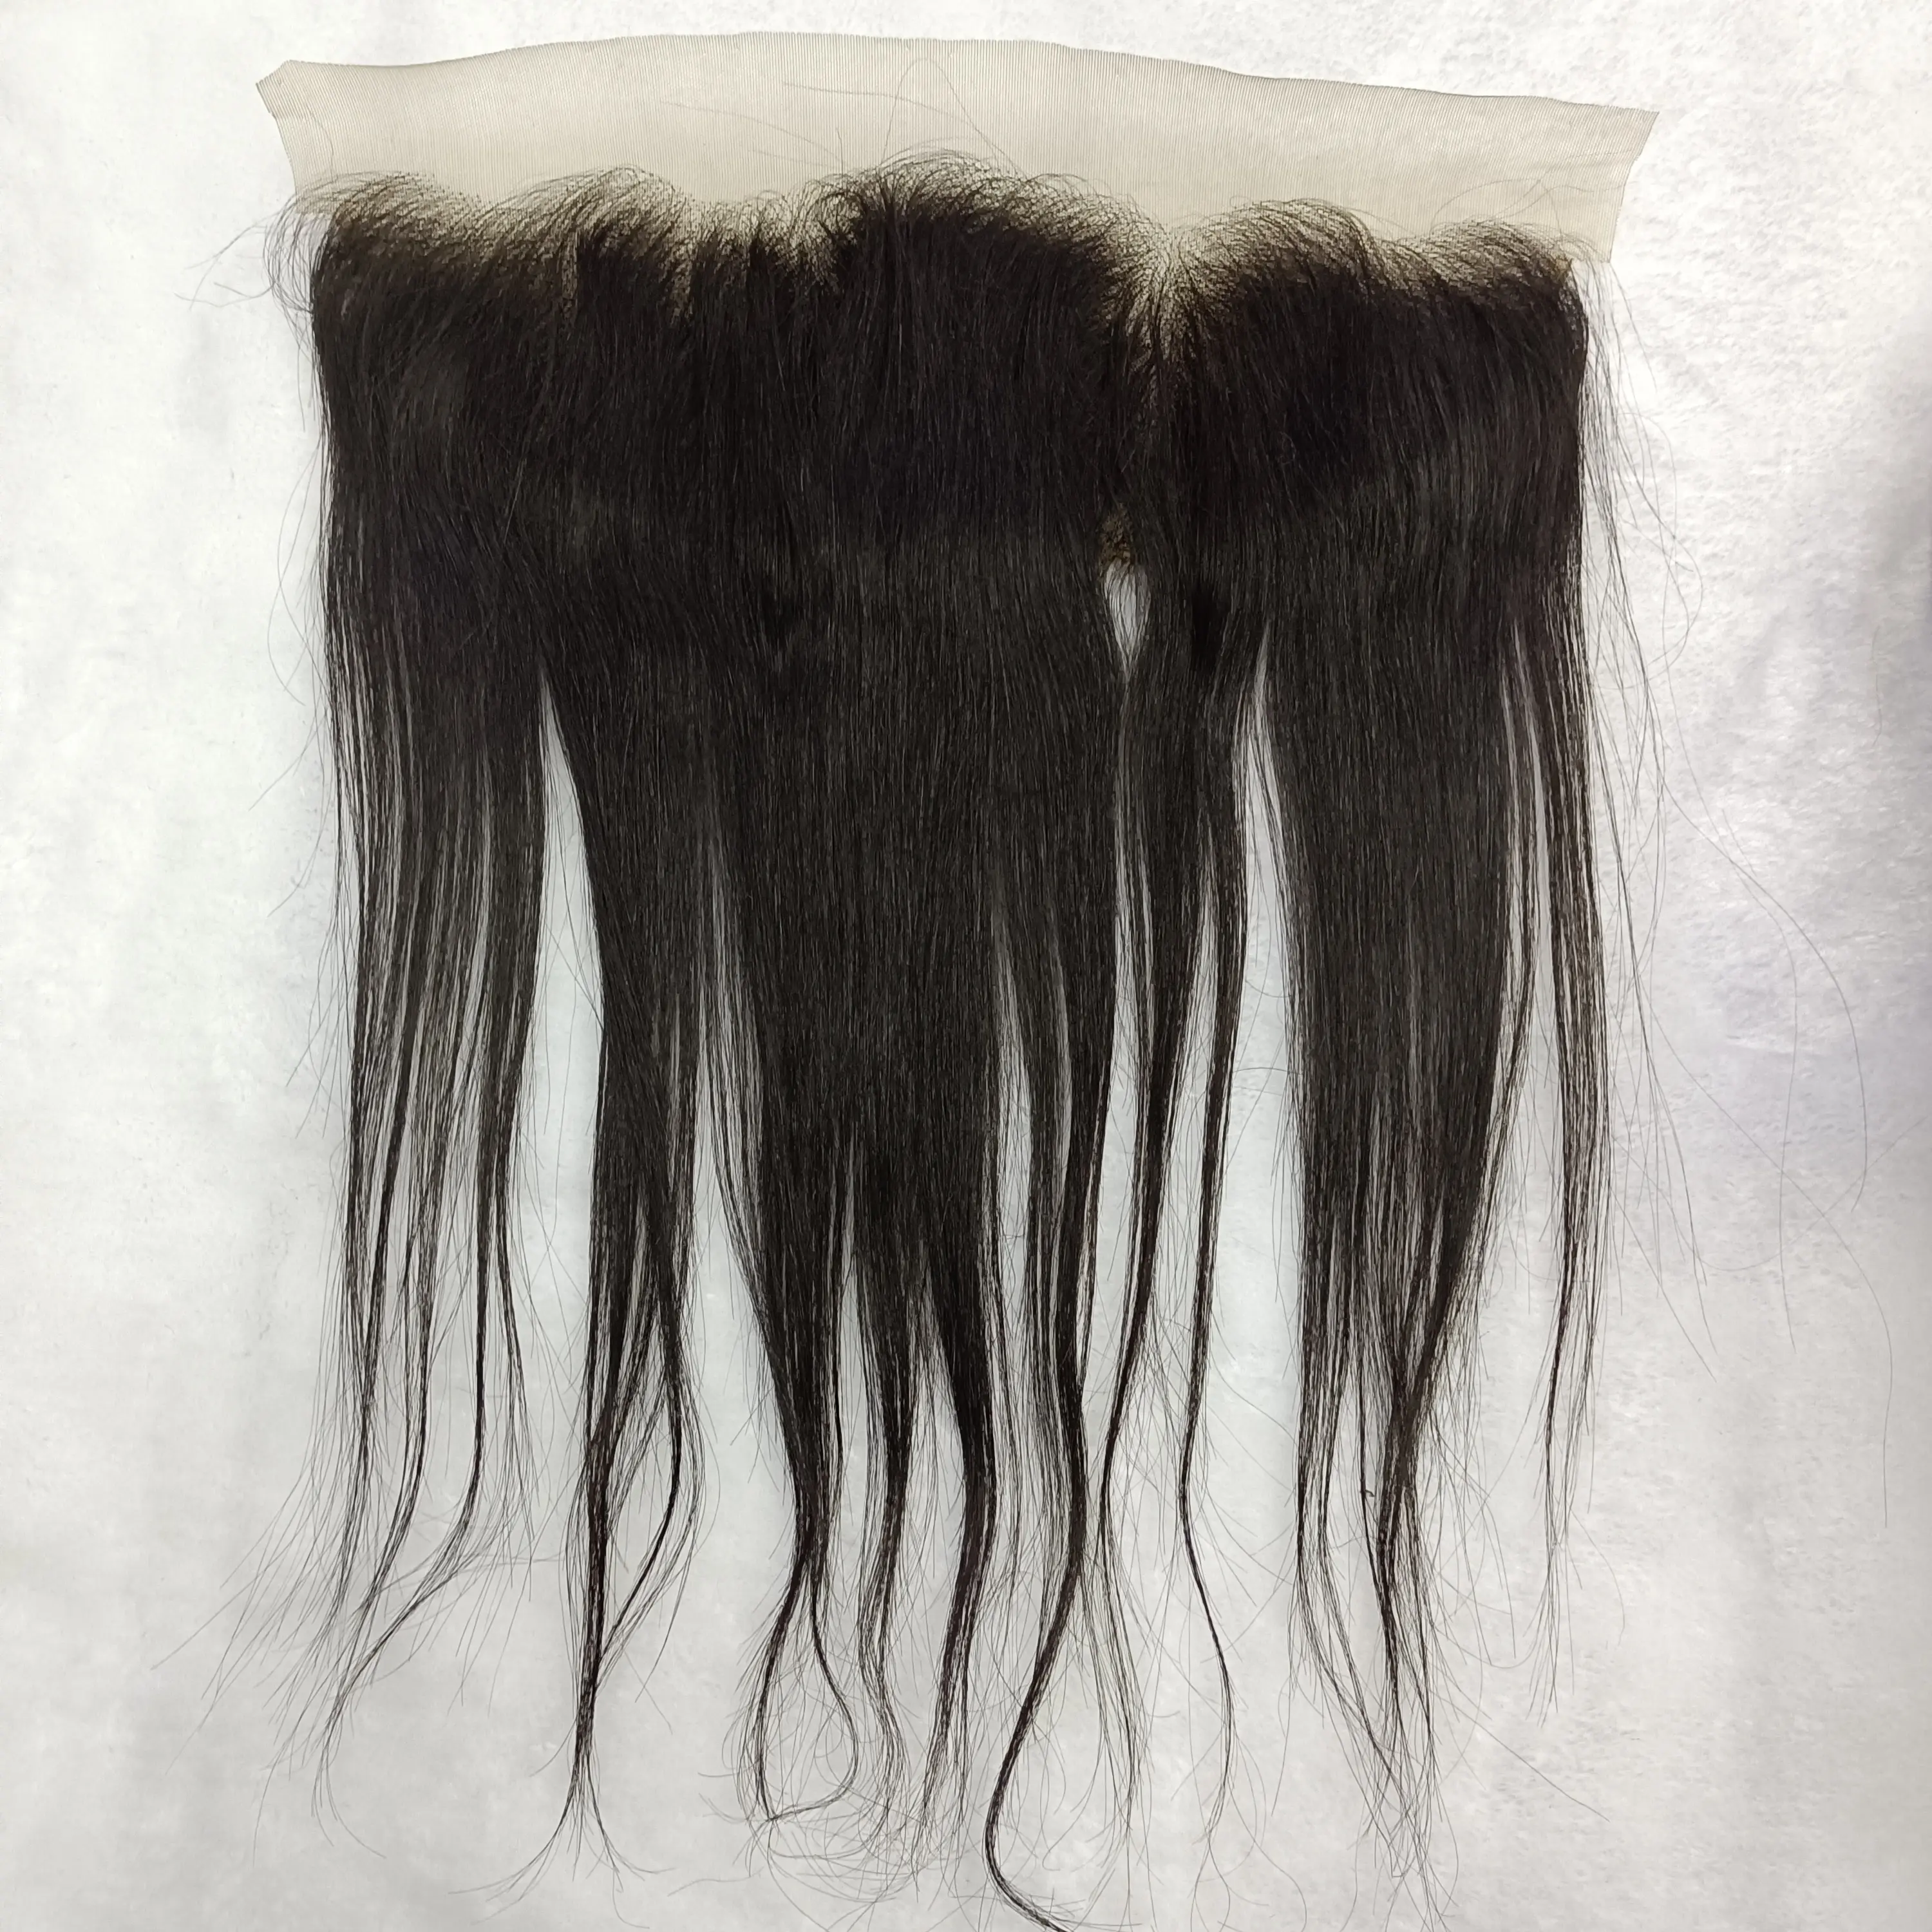 The spring new style 100% human hair 13*4 habd made Lace frontal in 2022